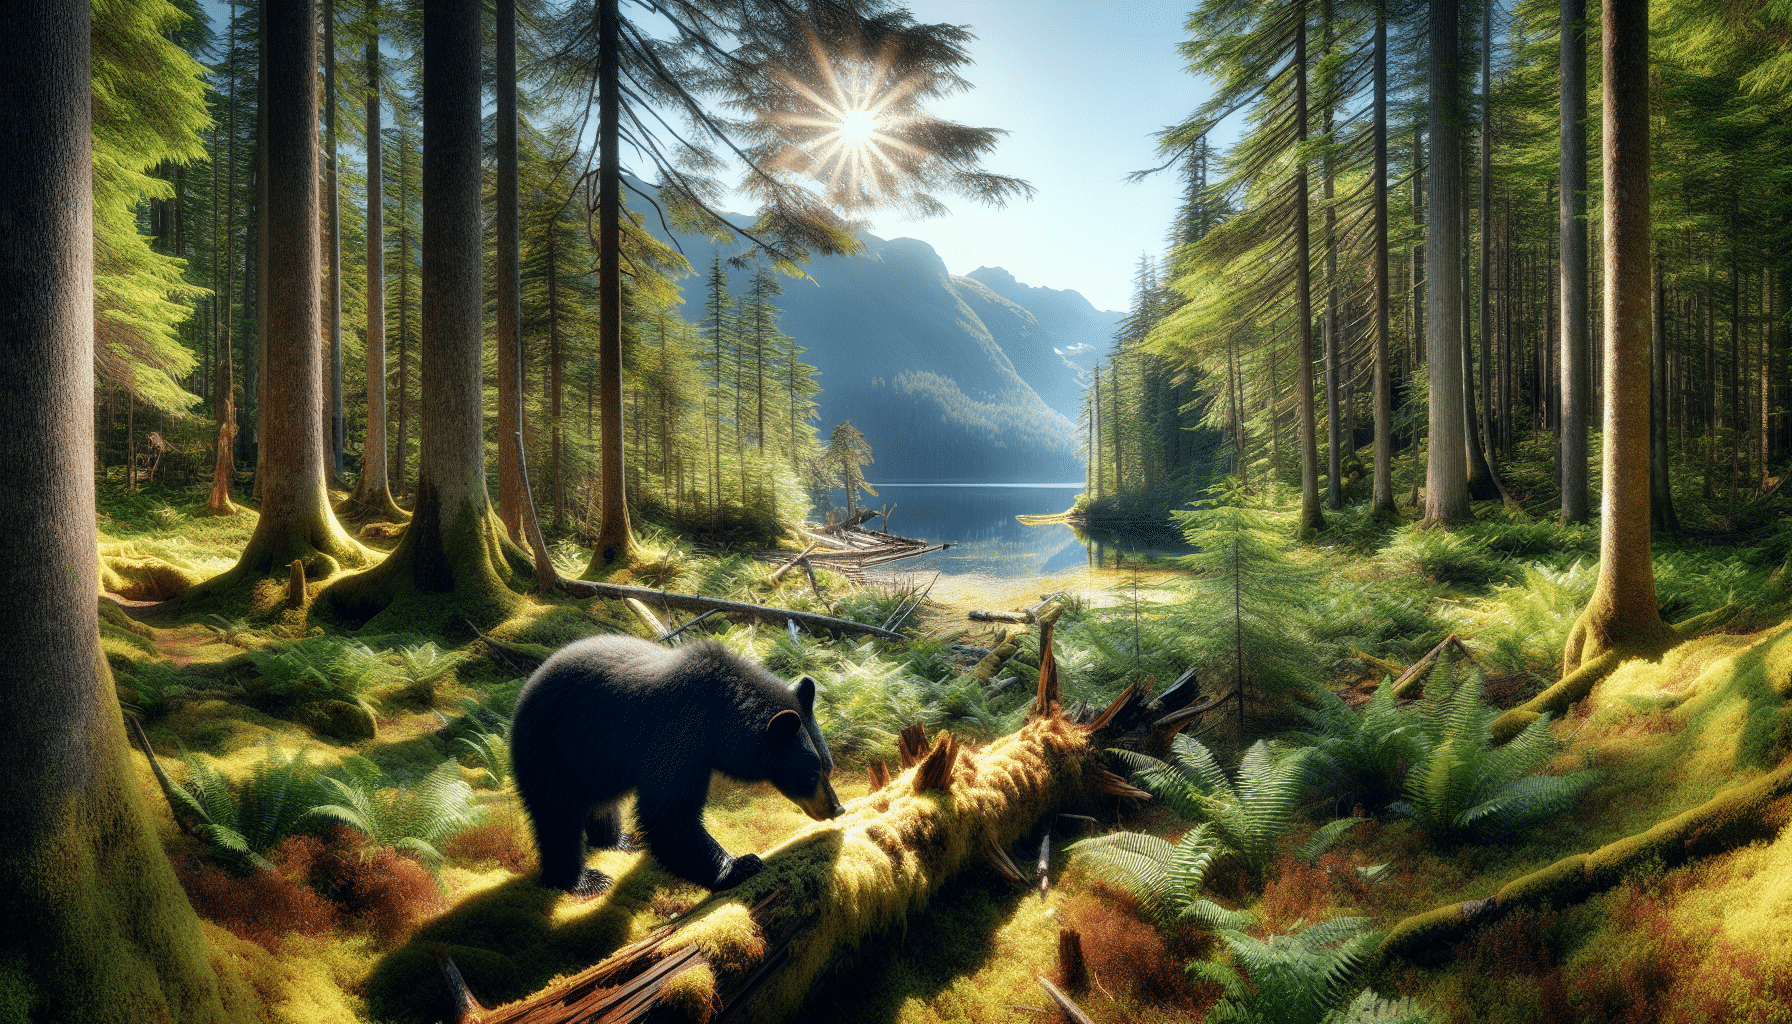 A deep forest scene under a bright afternoon sun. There are towering pine trees with dense, green needles. The forest floor is carpeted with ferns and moss and spotted with dappled sunlight. In the heart of the picture, a black bear, glossy with powerful limbs, is visible. The bear is foraging, poking at a fallen, rotting log with its snout. In the distance, you can see a tranquil lake, reflecting the surrounding scenery. Mountains, covered in more dense woodland, form a majestic backdrop. You can't see any human, brand name, or text in this tranquil natural setting.